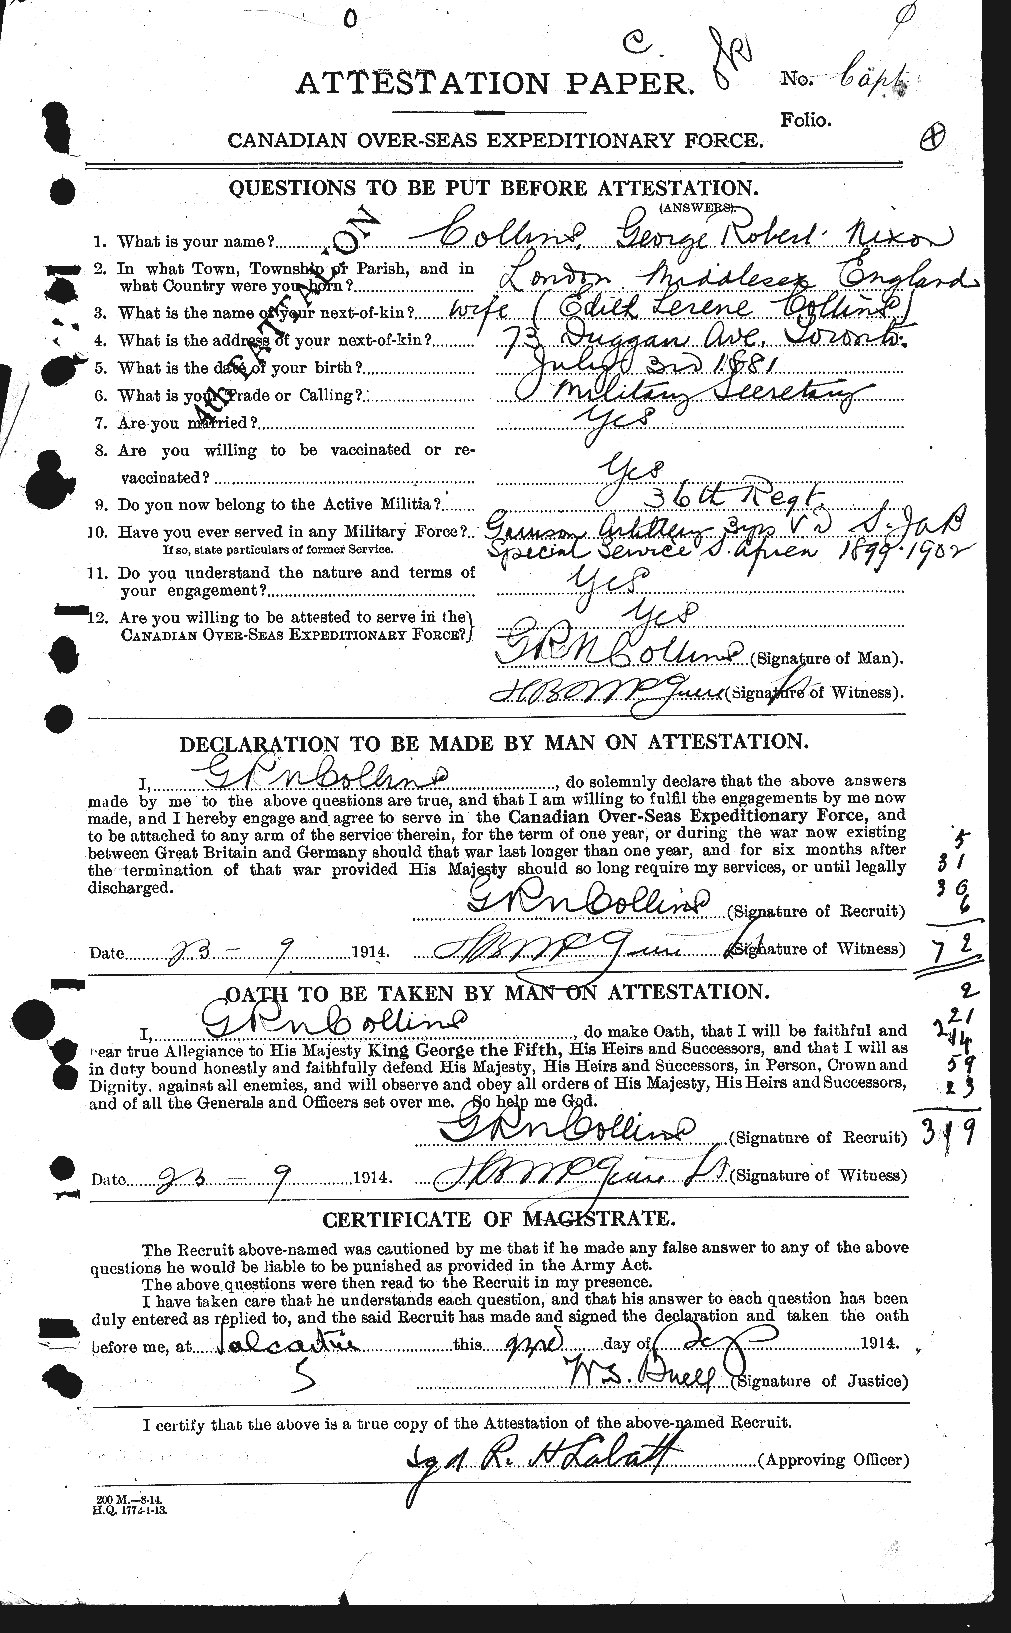 Personnel Records of the First World War - CEF 070529a